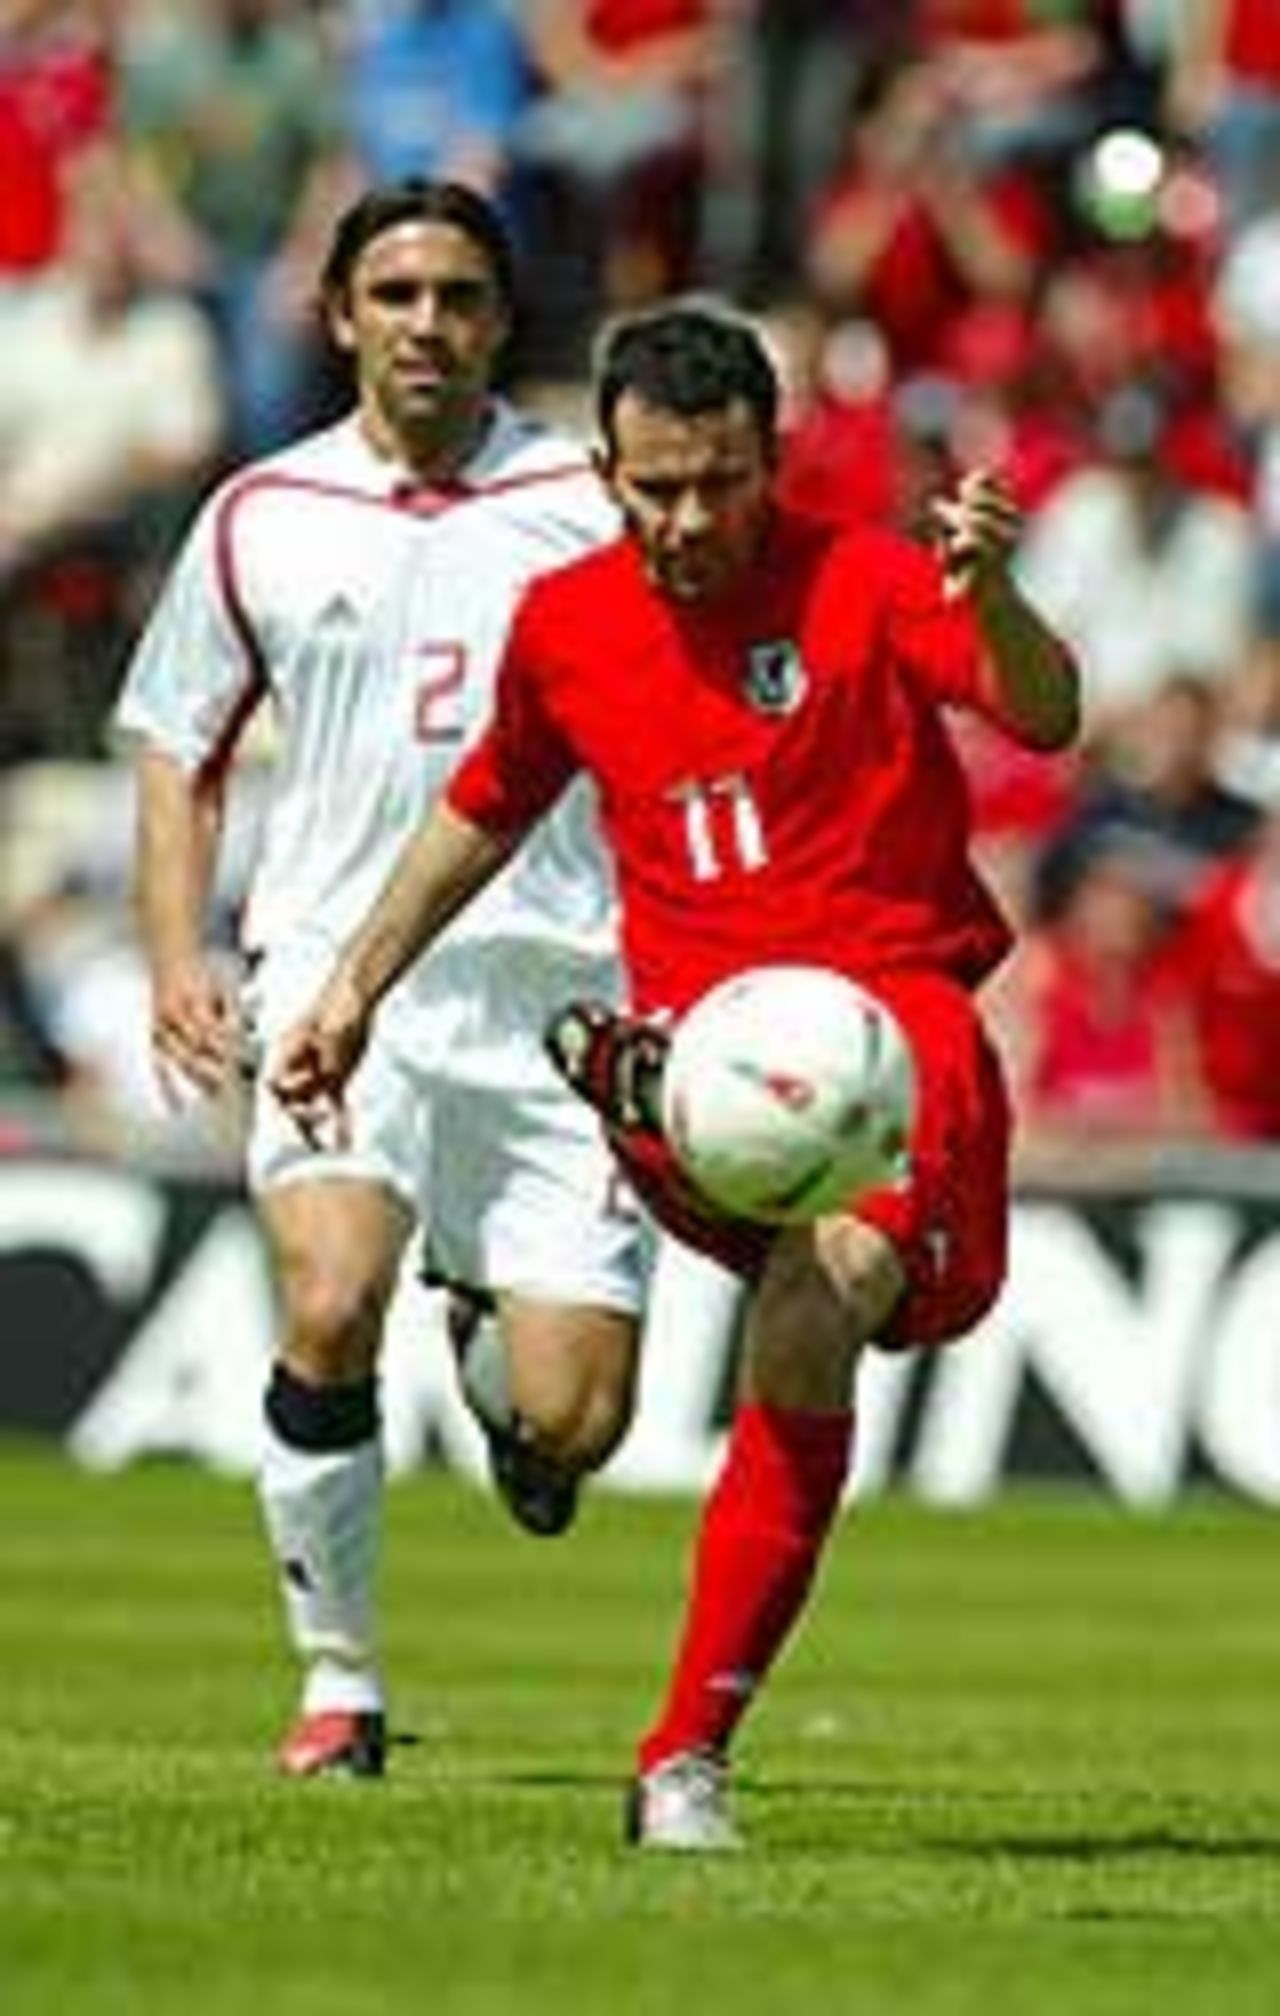 Ryan Giggs playing for Wales (March 2004)